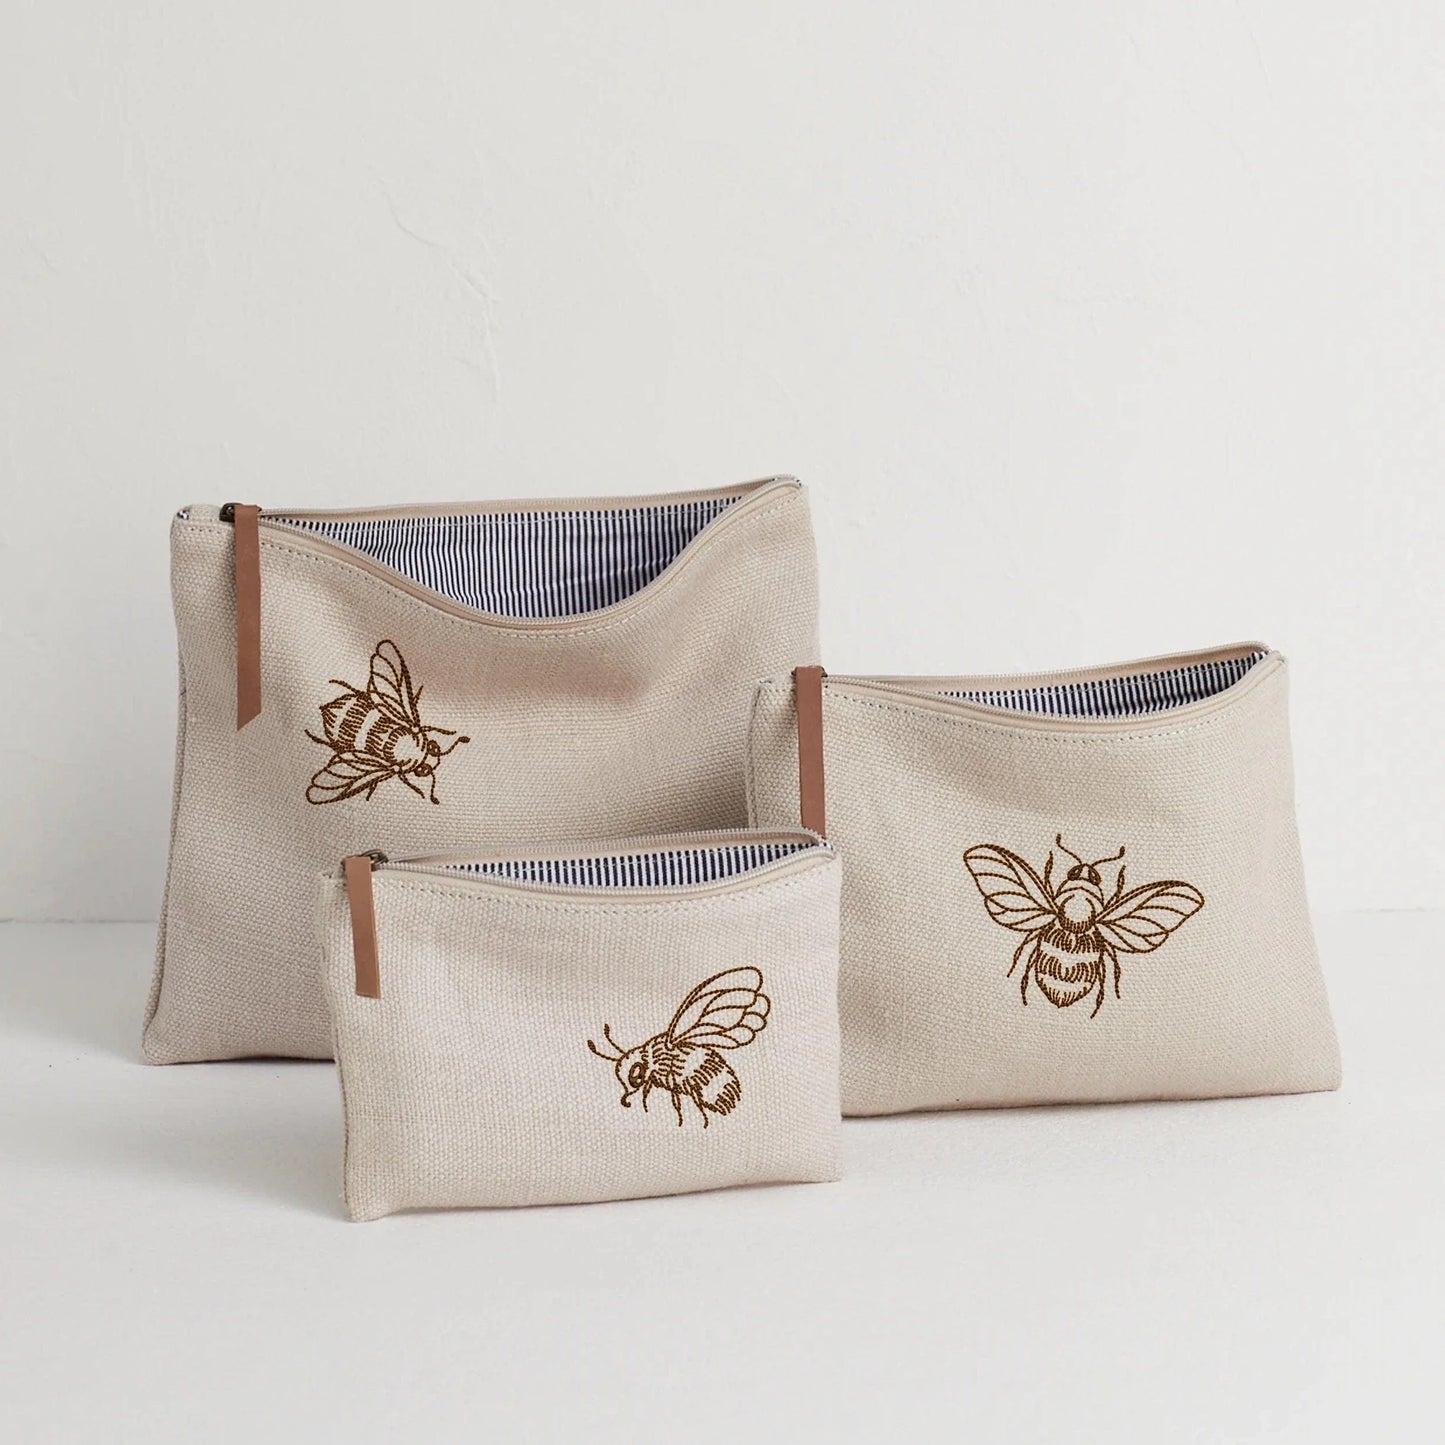 Honey Bee Machine Embroidery Design on a set of pouches